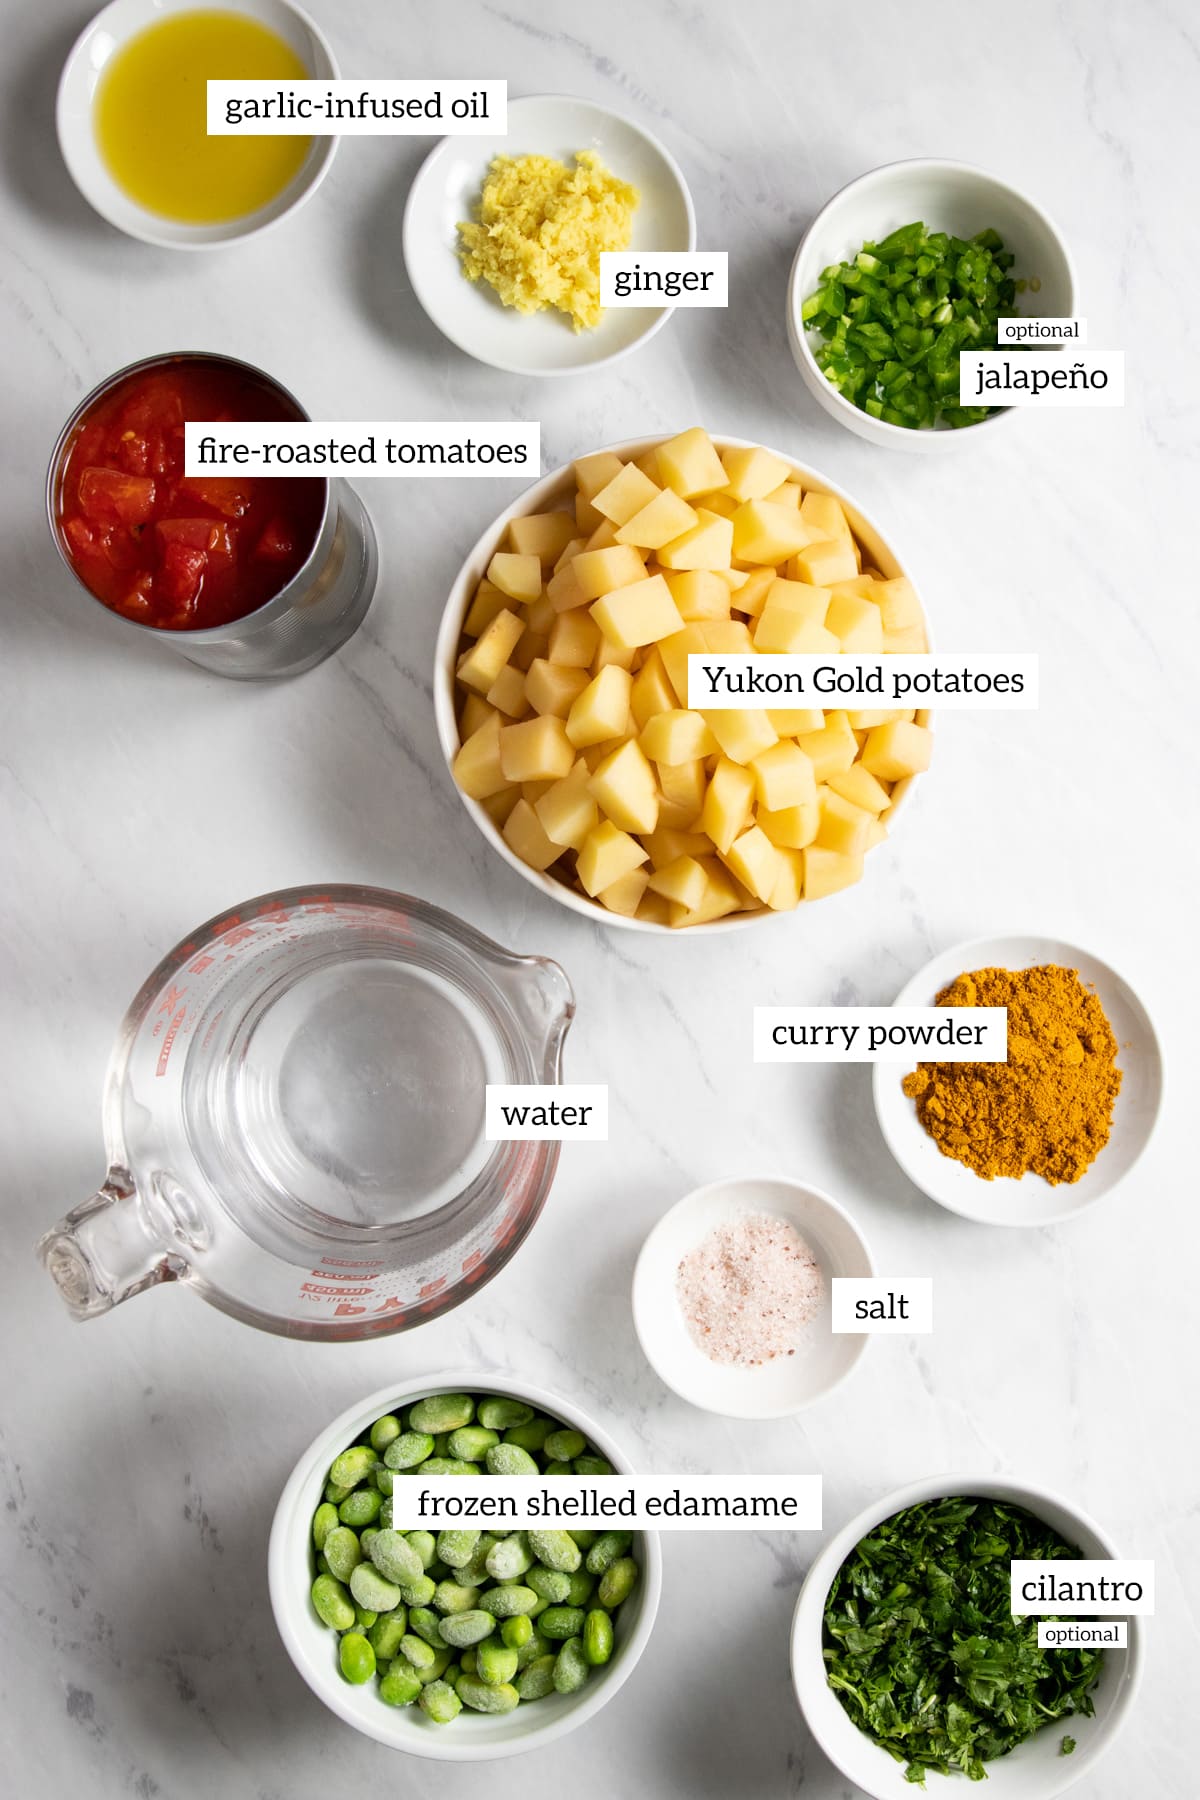 Ingredients needed for this vegetarian low FODMAP curry recipe are prepared and measured out into individual dishes.